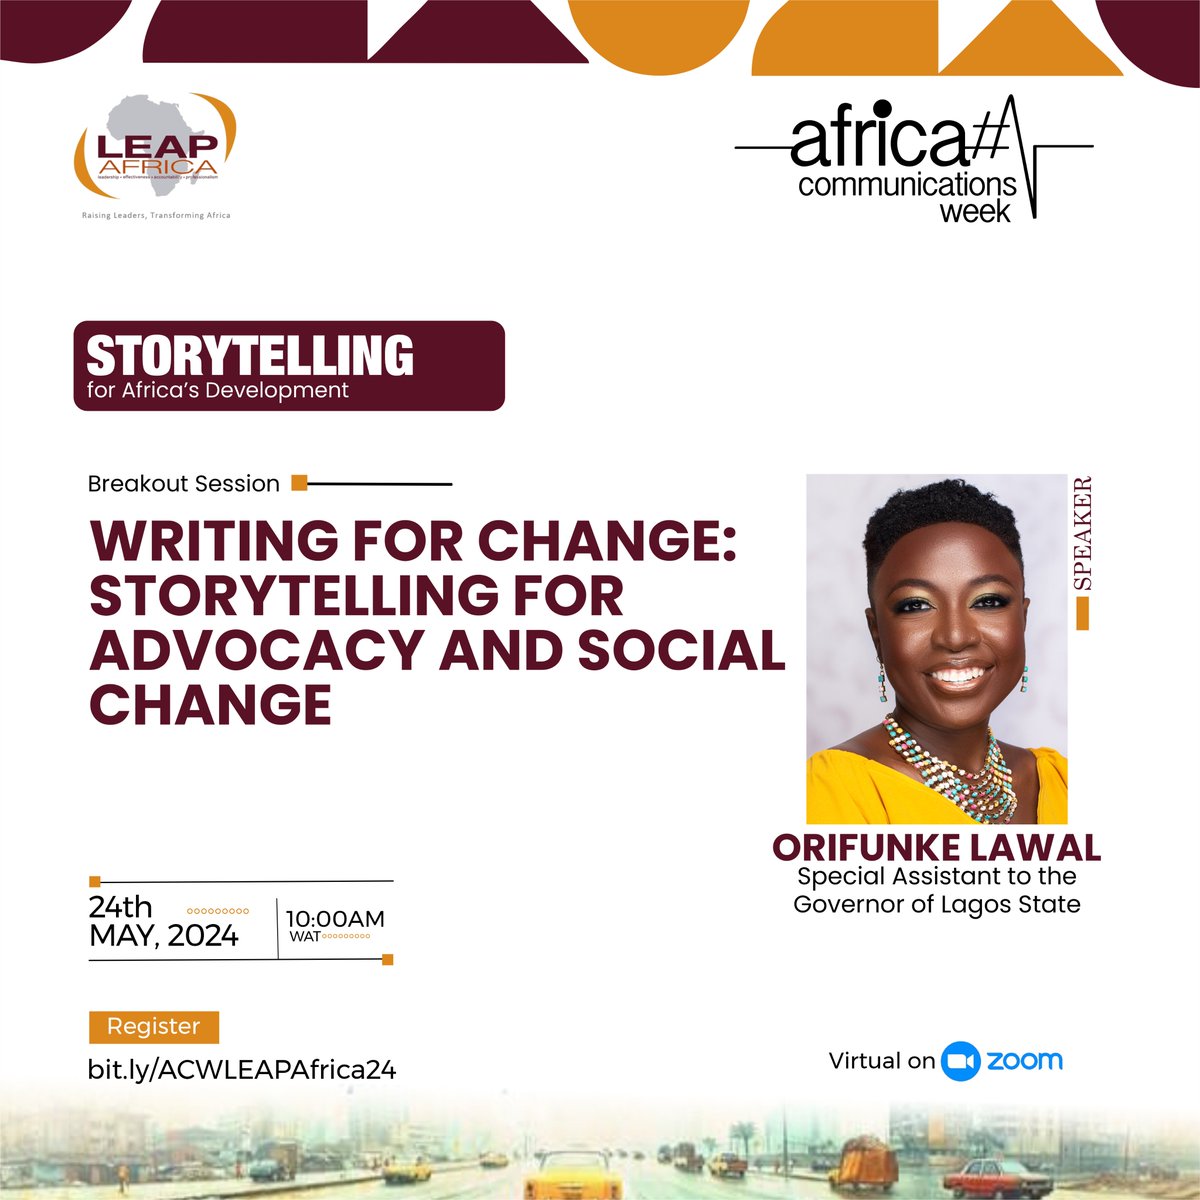 Are you ready?

Orifunke Lawal, Special Assistant to the Governor of Lagos State, takes the stage for an enlightening session at #AfricaCommsWeek2024, speaking on 'Writing for Change: Storytelling for Advocacy and Social Change.'